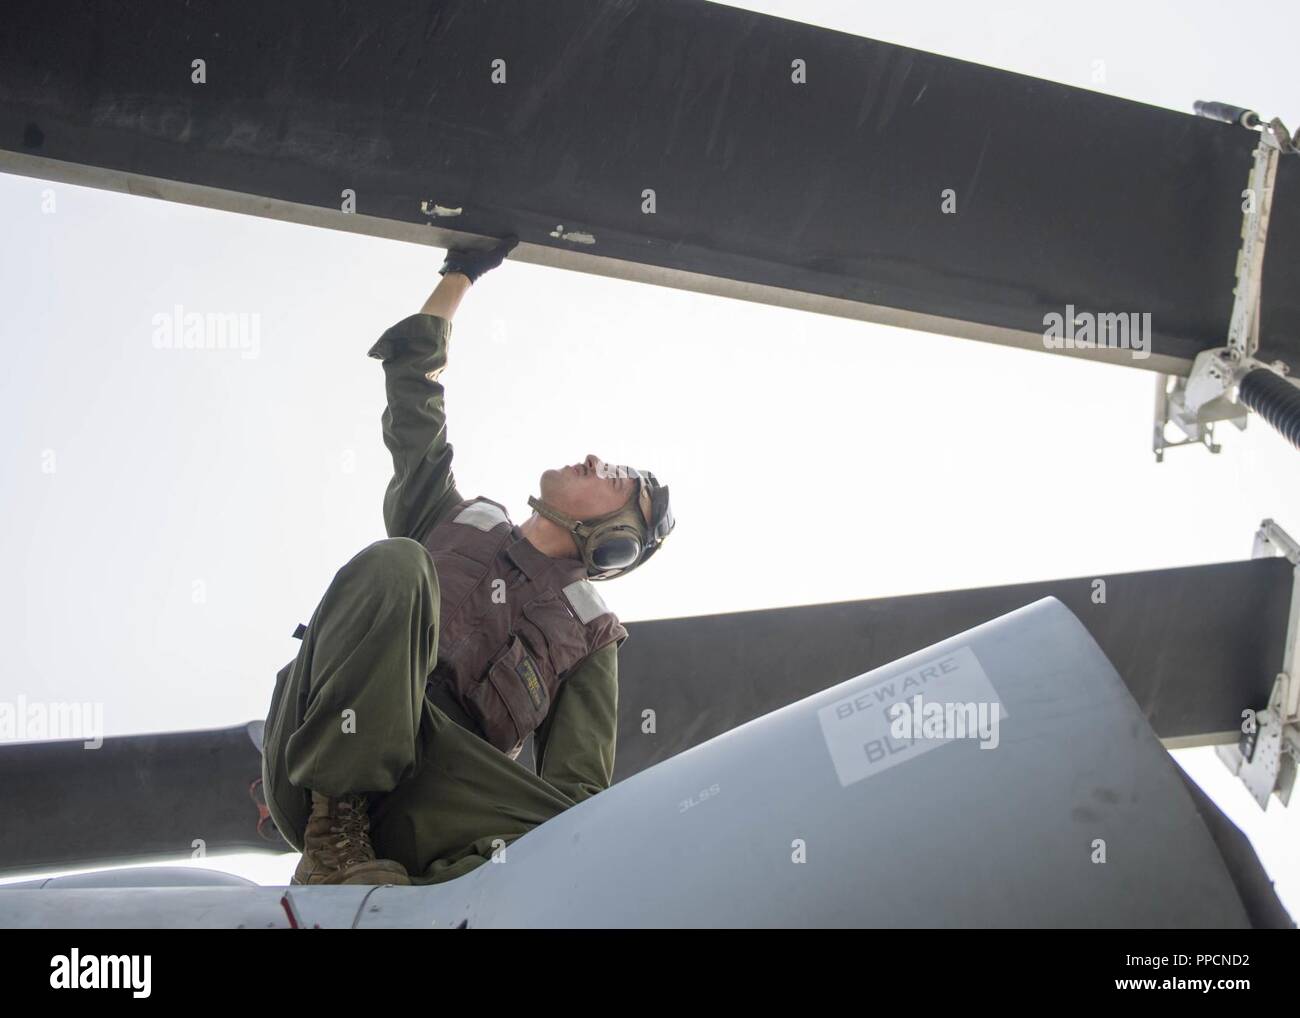 INDIAN OCEAN (Aug. 20, 2018) Marine Corps Cpl. Matthew Regan, from Tampa, Fla., assigned to the Marine Light Attack Helicopter detachment of Marine Medium Tiltrotor Squadron (VMM) 166, performs a pre-flight inspection on a UH-1Y Venom helicopter from the flight deck of San Antonio-class amphibious transport dock USS Anchorage (LPD 23) during a regularly scheduled deployment of the Essex Amphibious Ready Group (ARG) and 13th Marine Expeditionary Unit (MEU). The Essex ARG/13th MEU is a capable and lethal Navy-Marine Corps team deployed to the 7th fleet area of operations to support regional stab Stock Photo